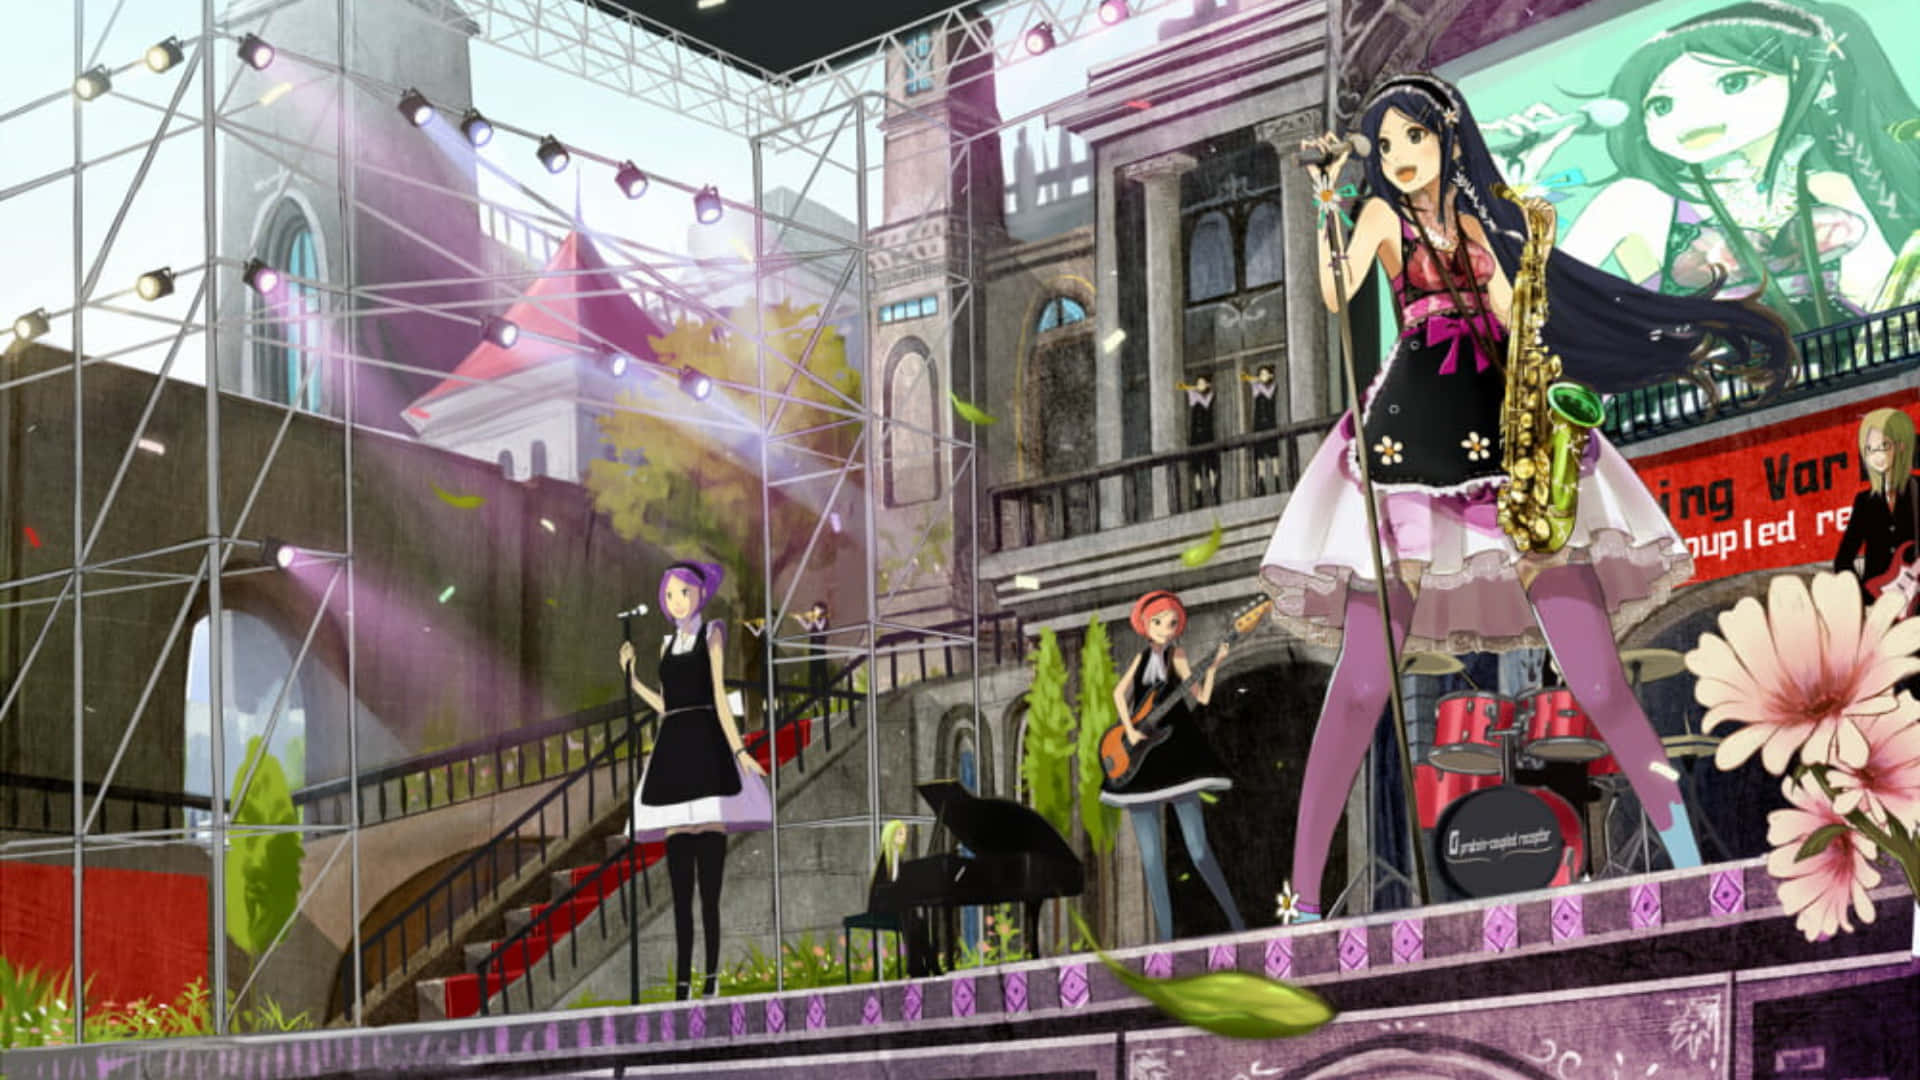 Kessoku Band Anime Concert Stage Background